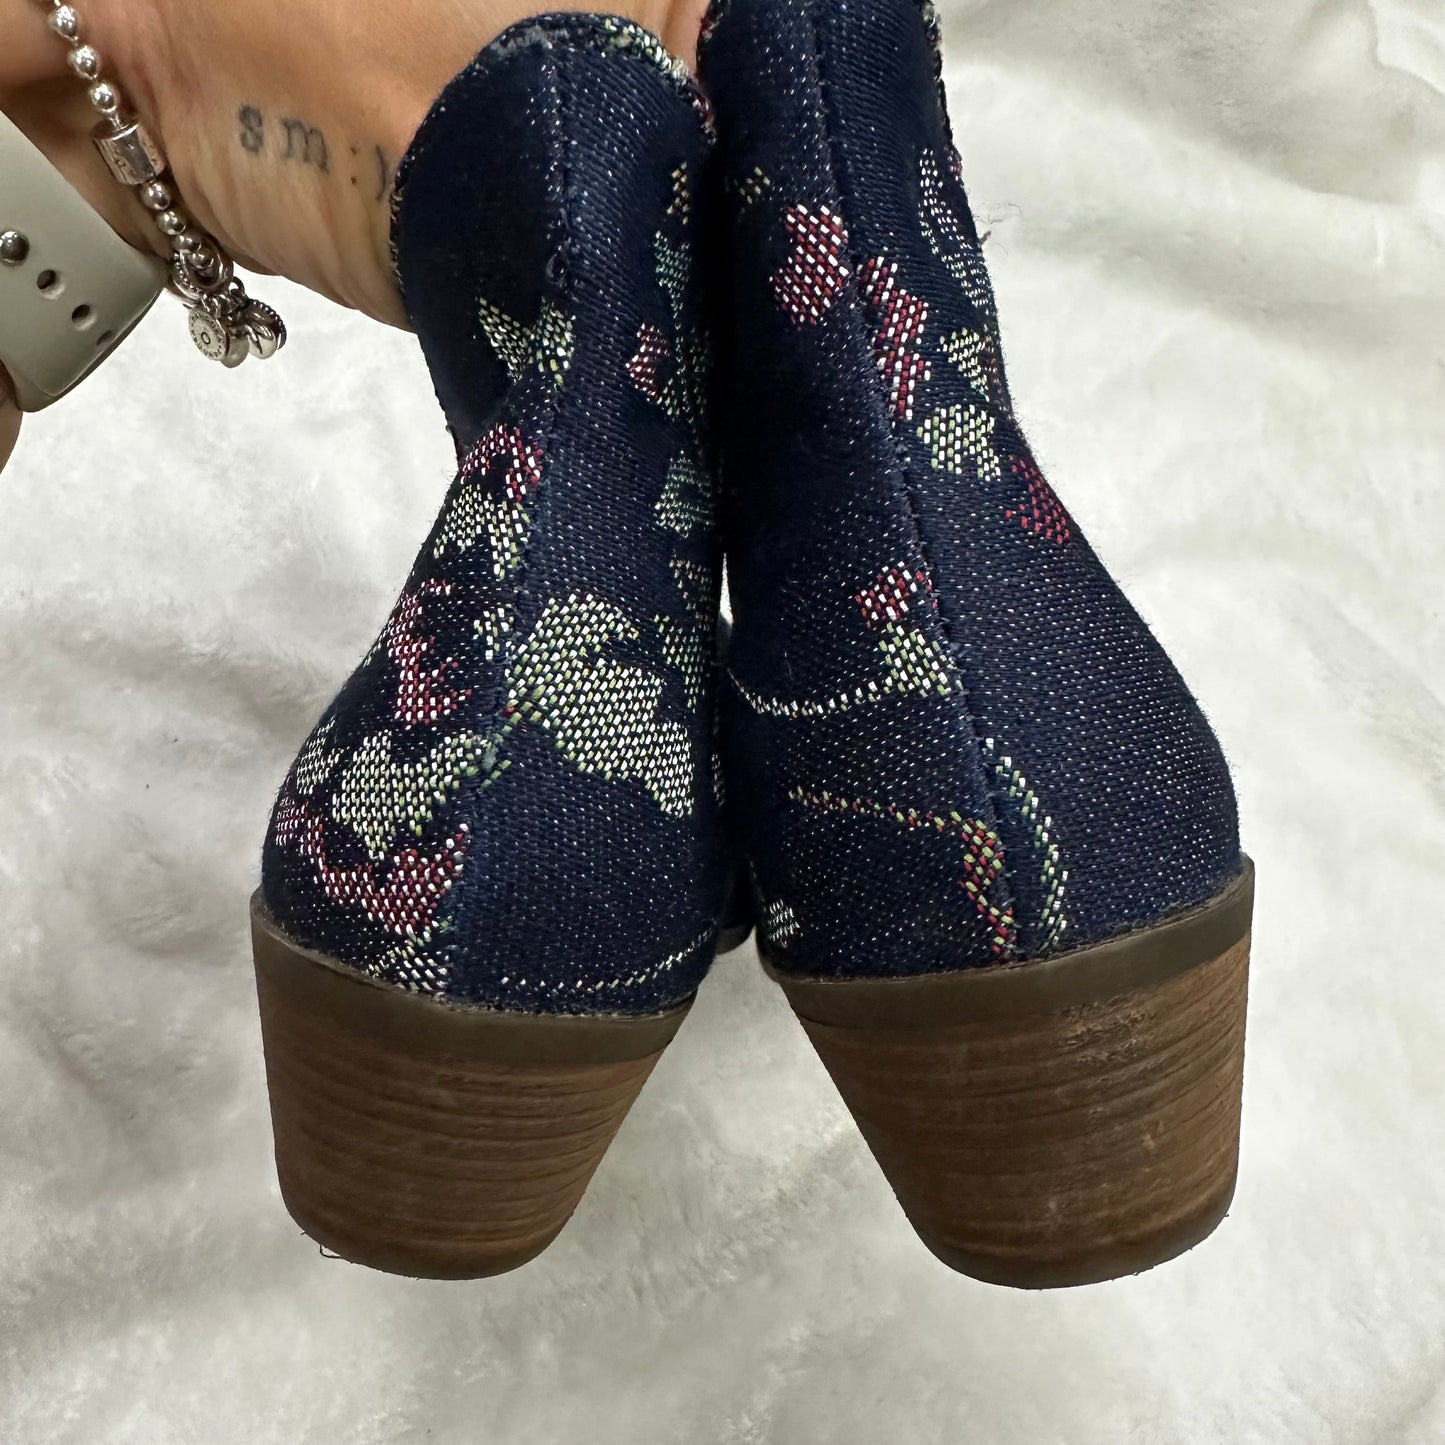 Floral Boots Ankle Flats Me Too, Size 7.5